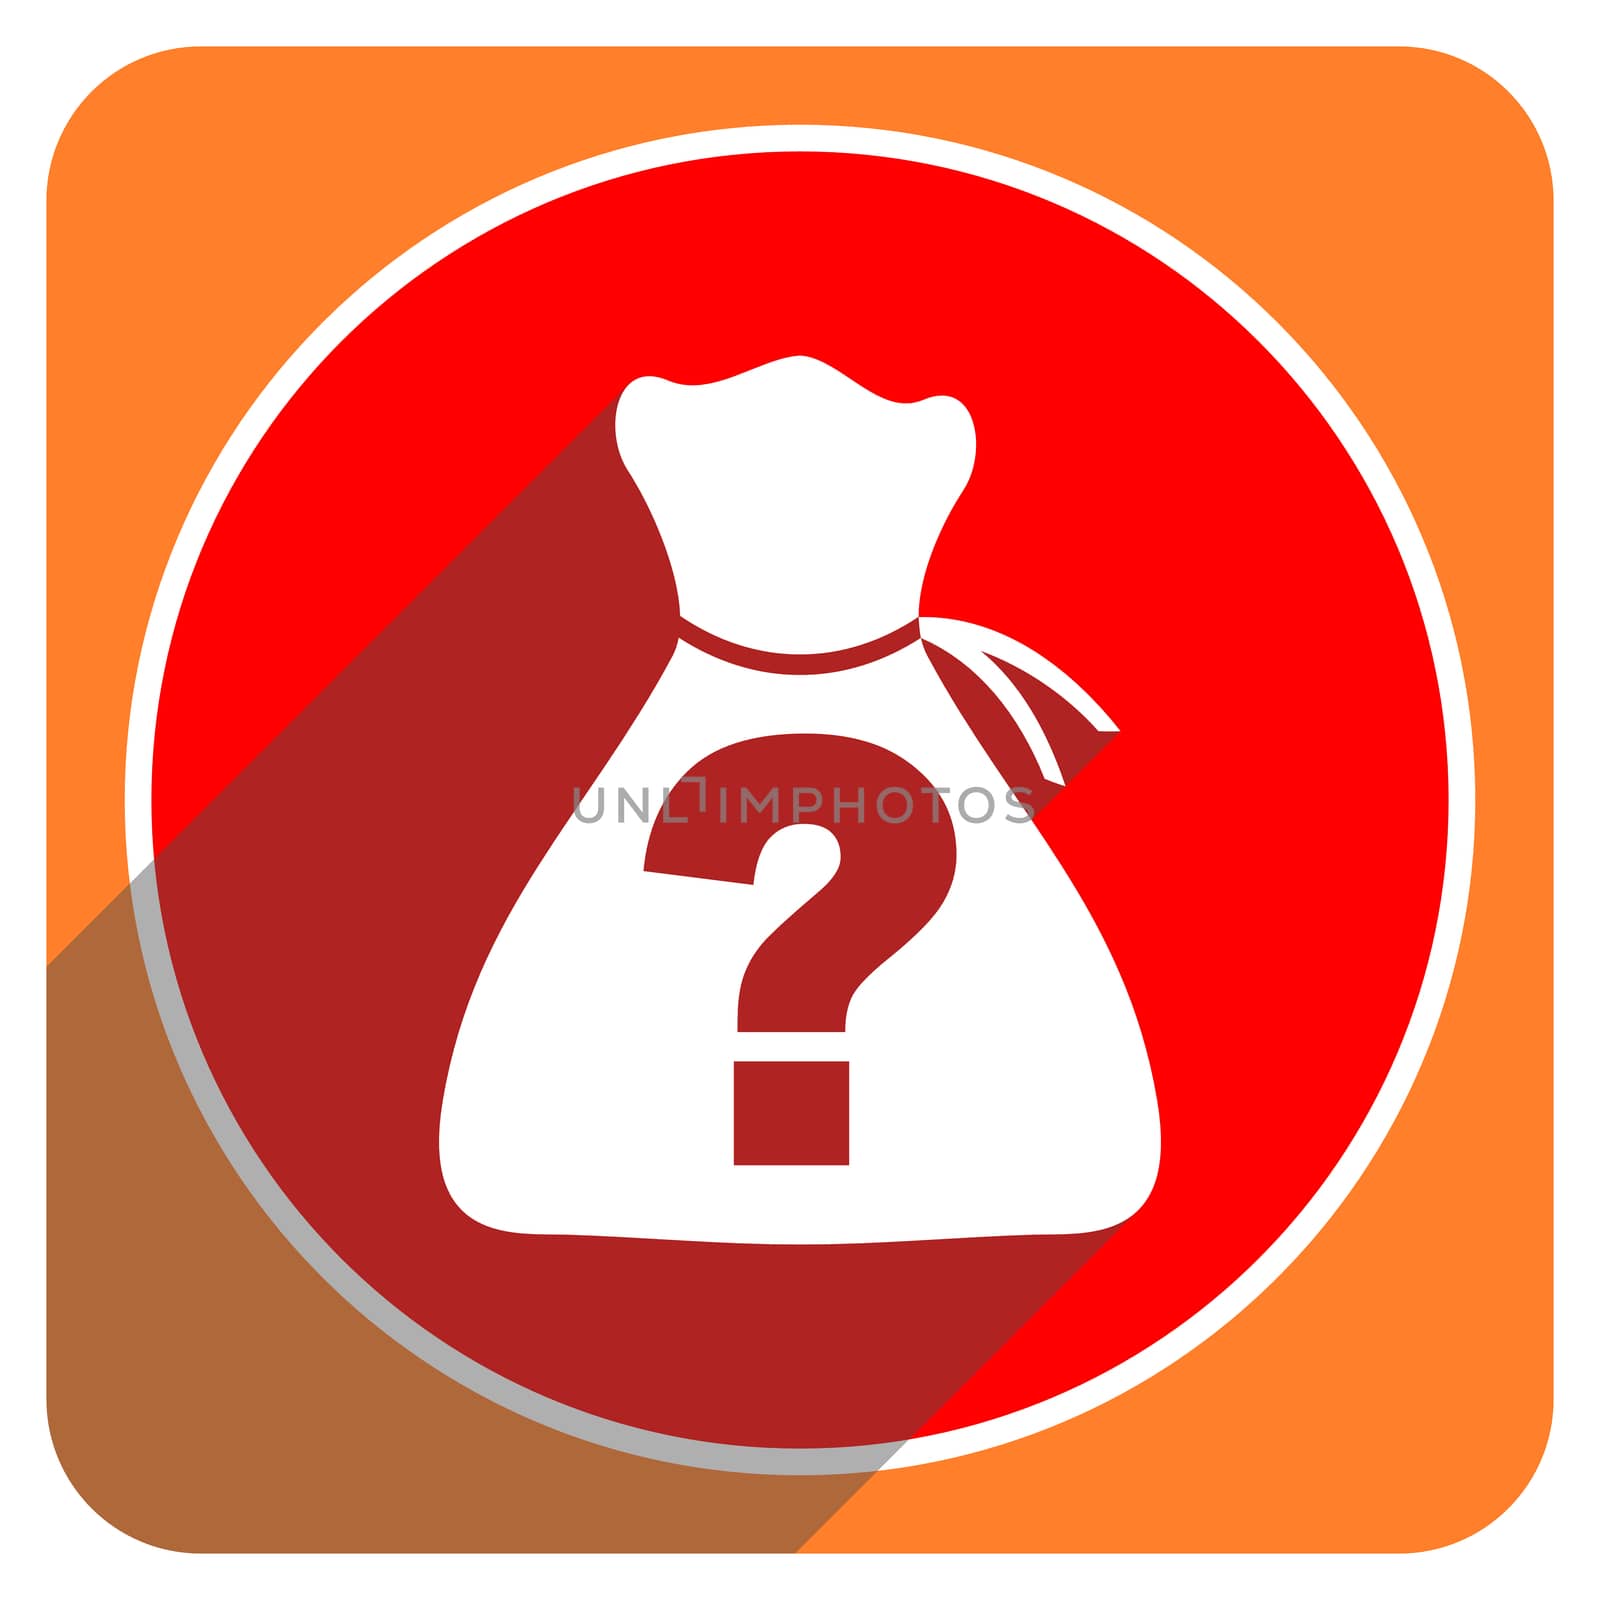 riddle red flat icon isolated